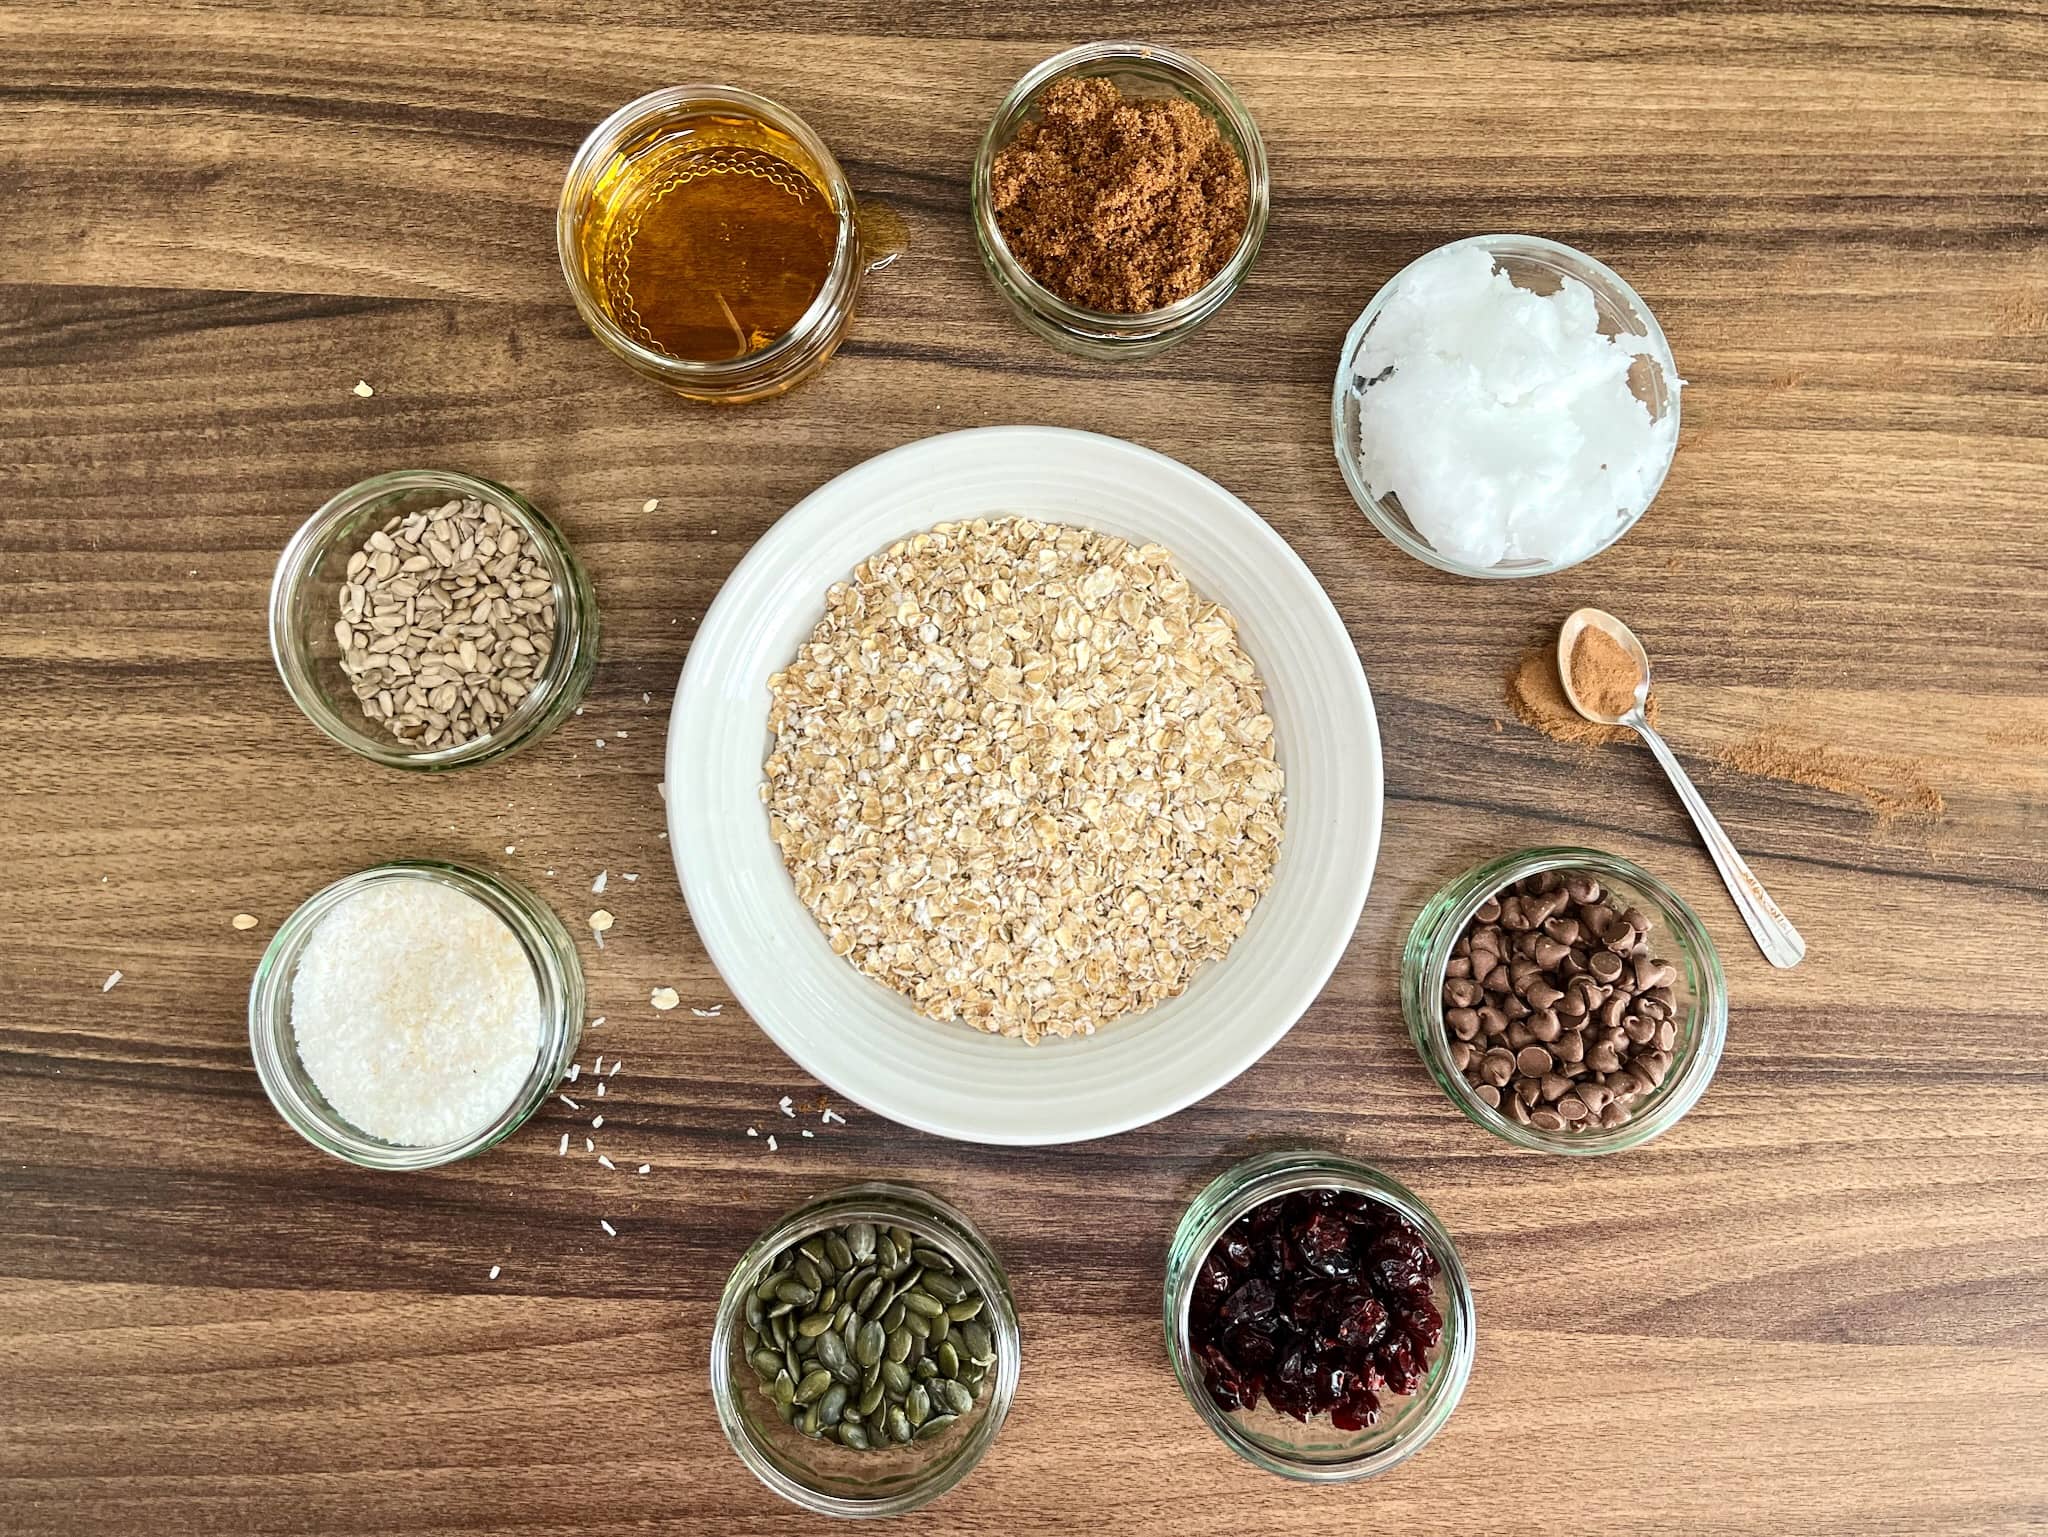 All the ingredients are on the tabletop, ready to make No-Bake Nut-Free Muesli Bars